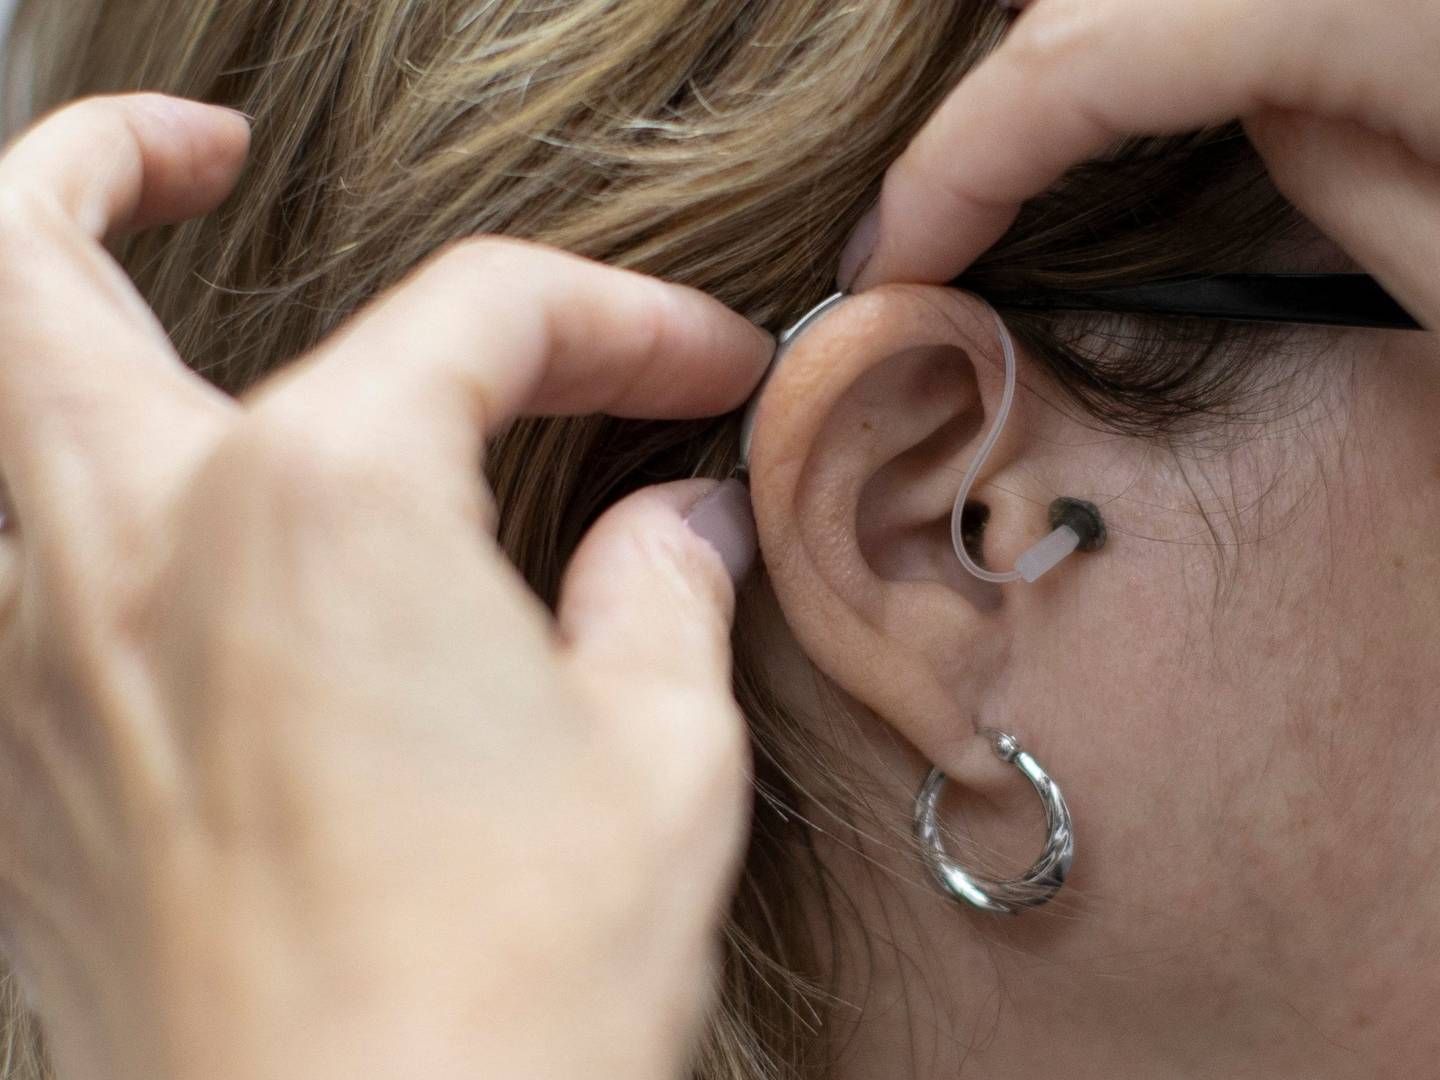 Getting hands on hearing aids has become more expensive for some customers this year | Photo: Joe Raedle/AFP / GETTY IMAGES NORTH AMERICA